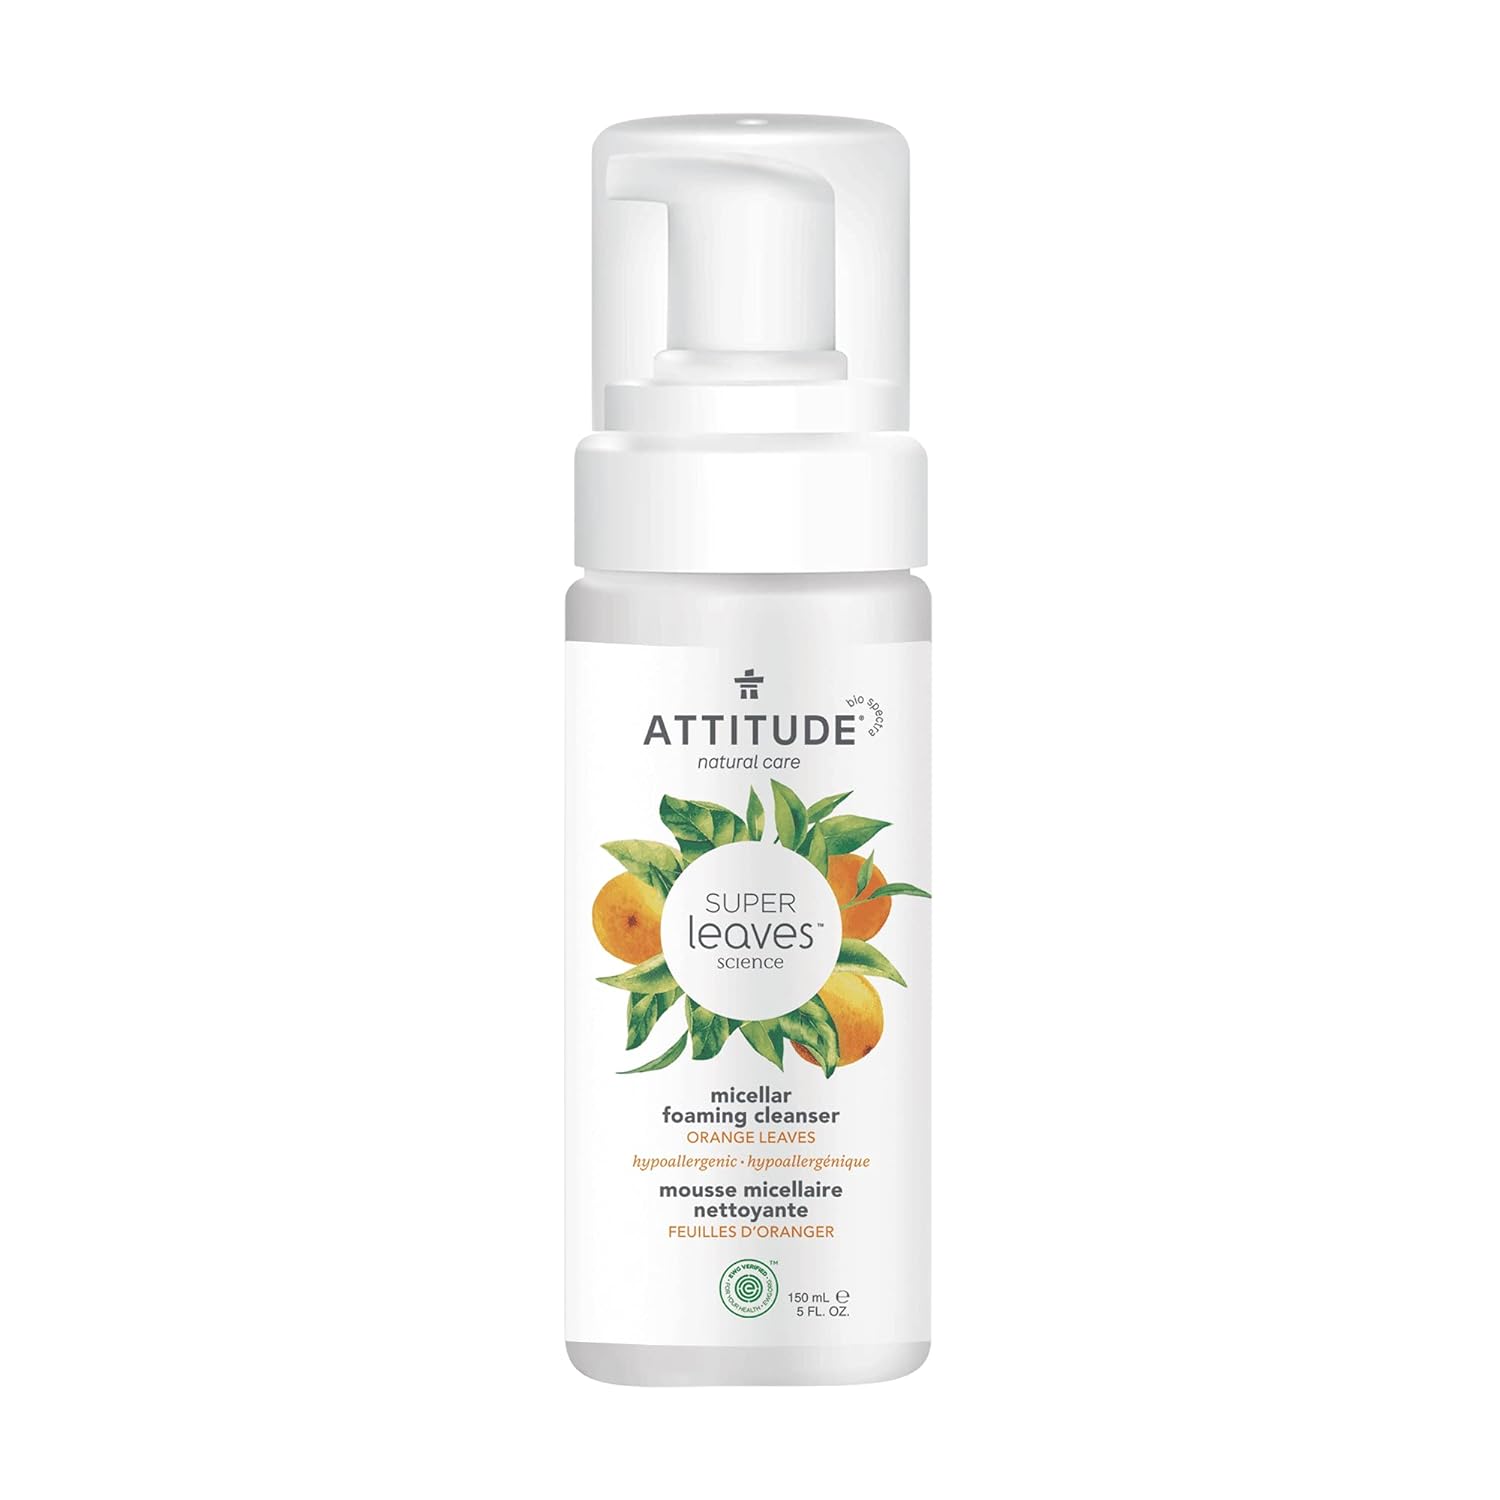 ATTITUDE Micellar Foaming Facial Cleanser, EWG Verified, Dermatologically Tested, Plant and Mineral-Based, Vegan, Orange Leaves, 5 Fl Oz